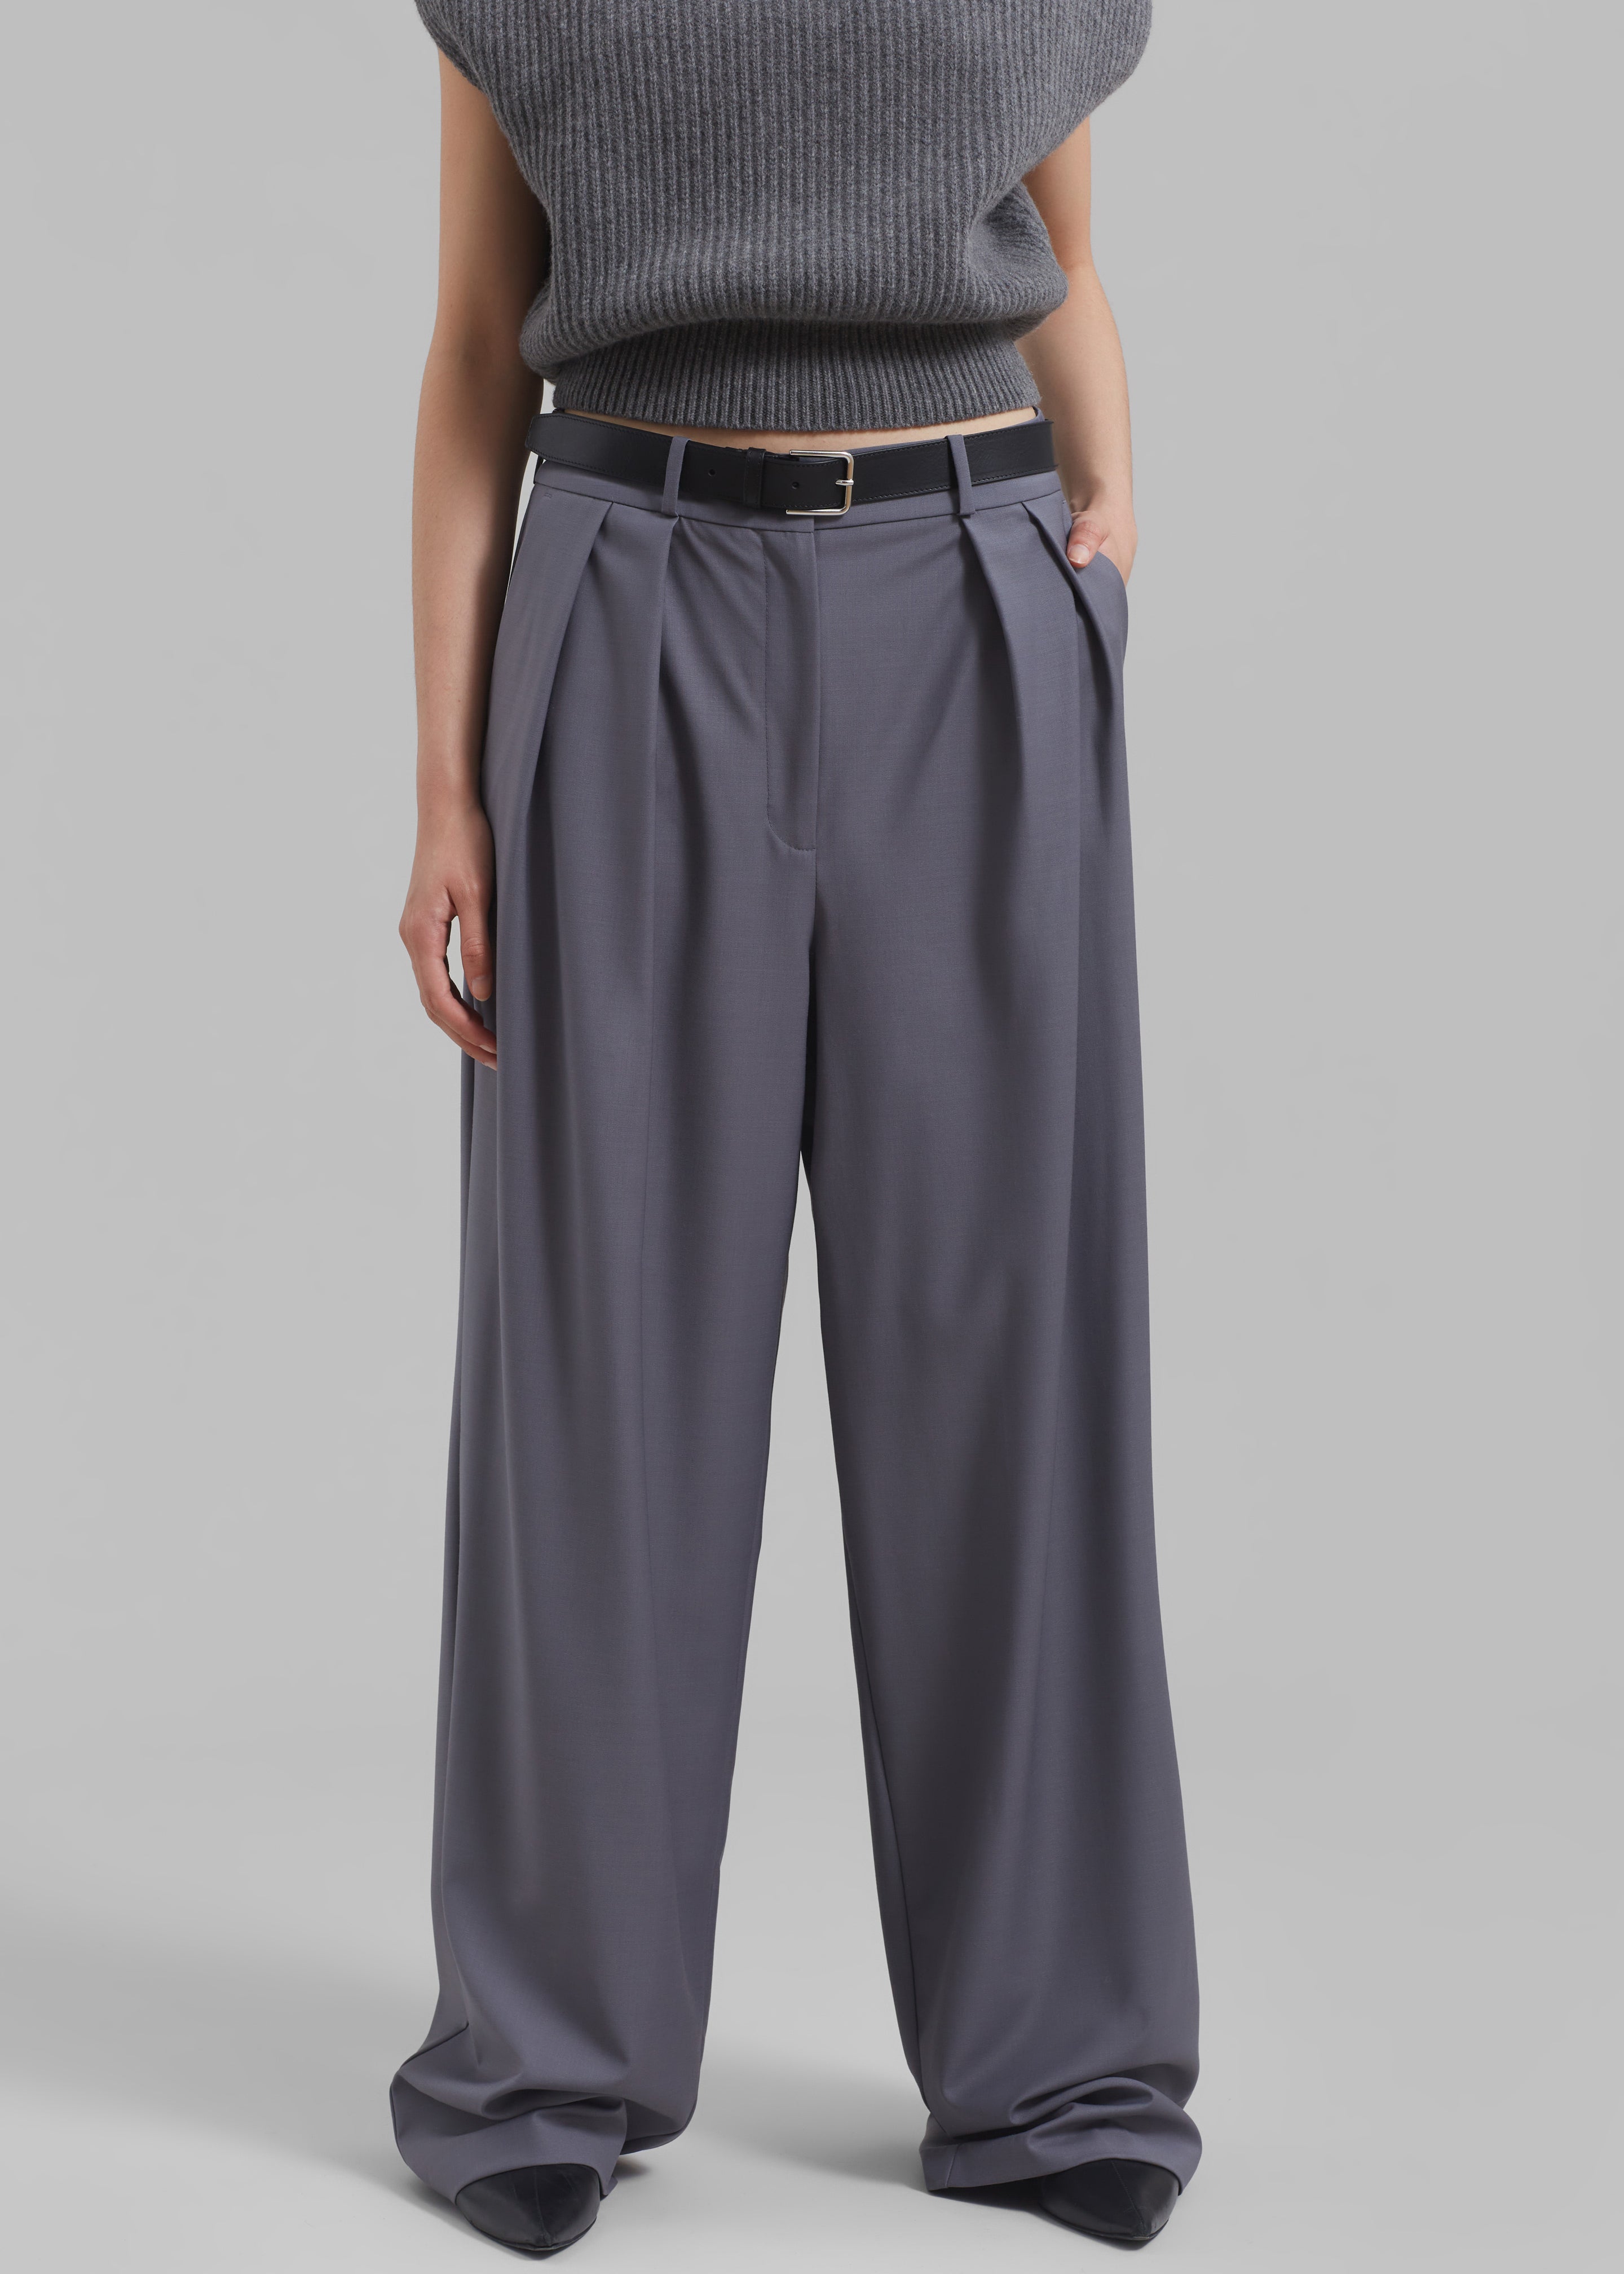 Ripley Pleated Trousers - Grey - 6